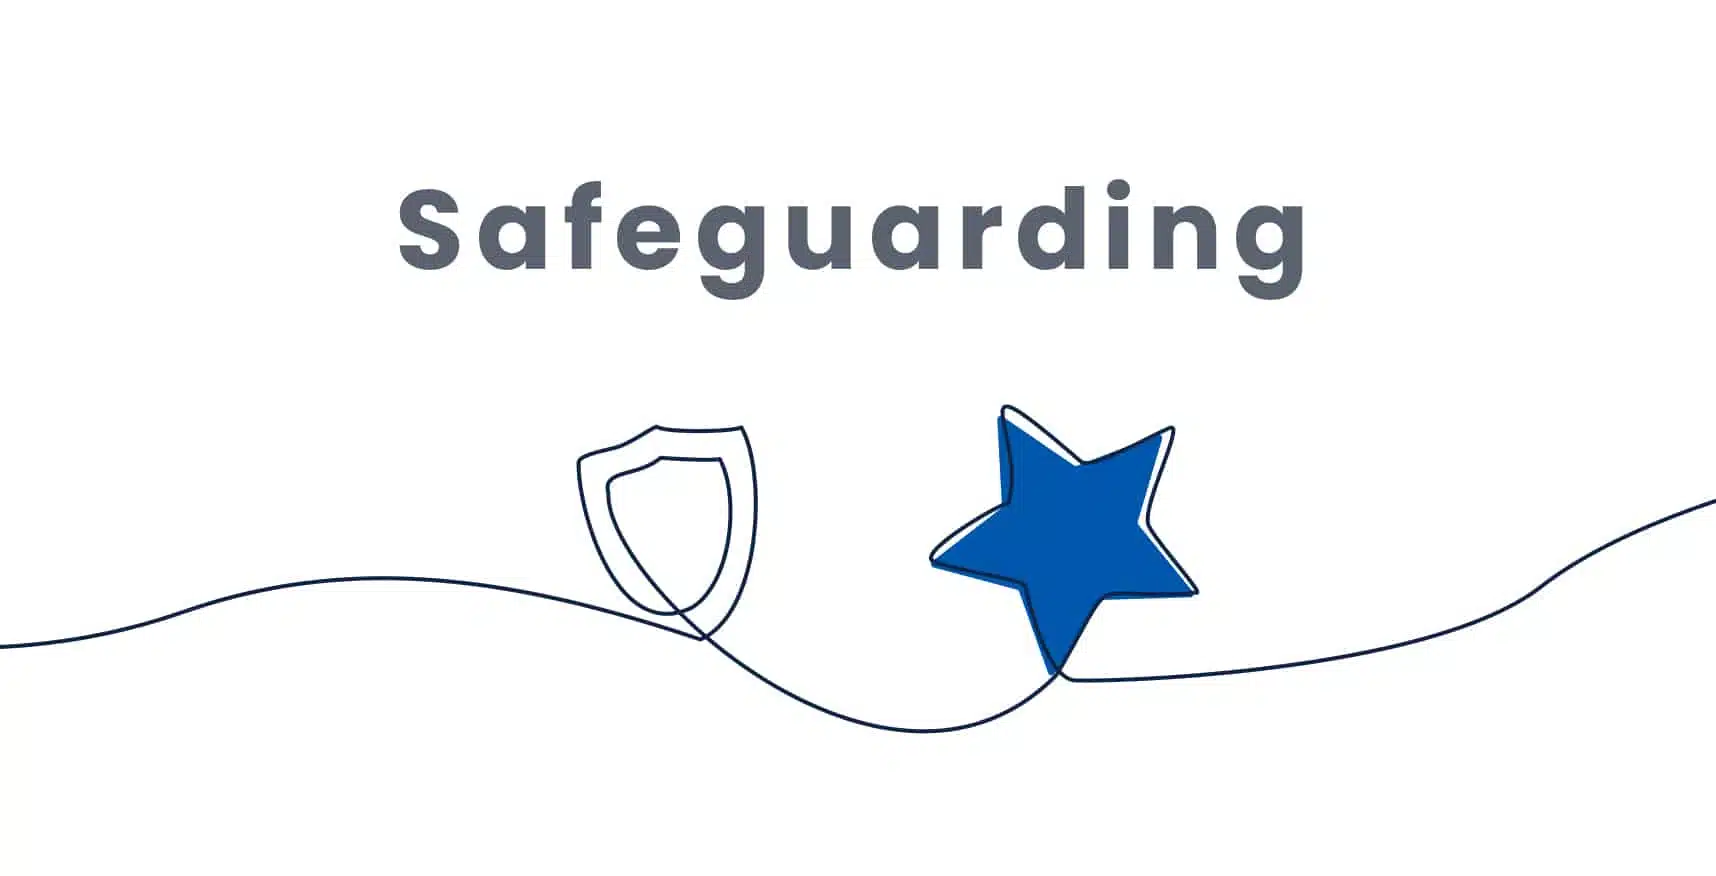 Minimalist illustration featuring a shield and star connected by a flowing line, with the word "Safeguarding" above in gray.